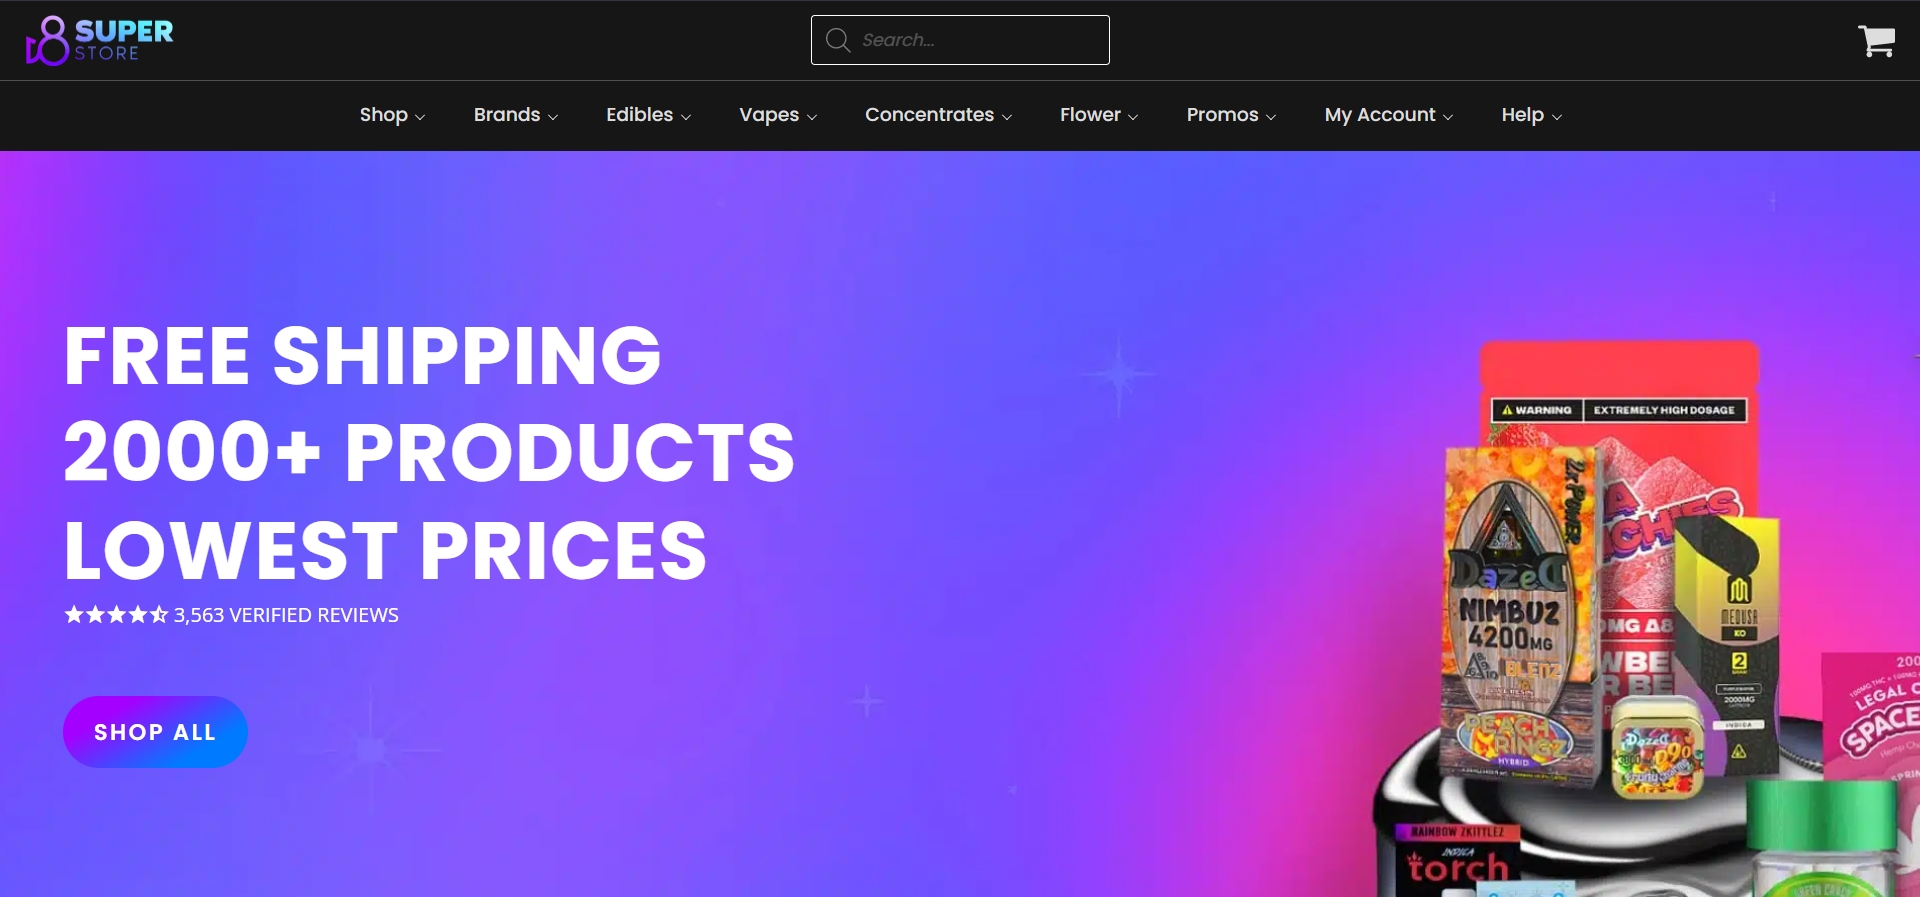 d8 super store homepage